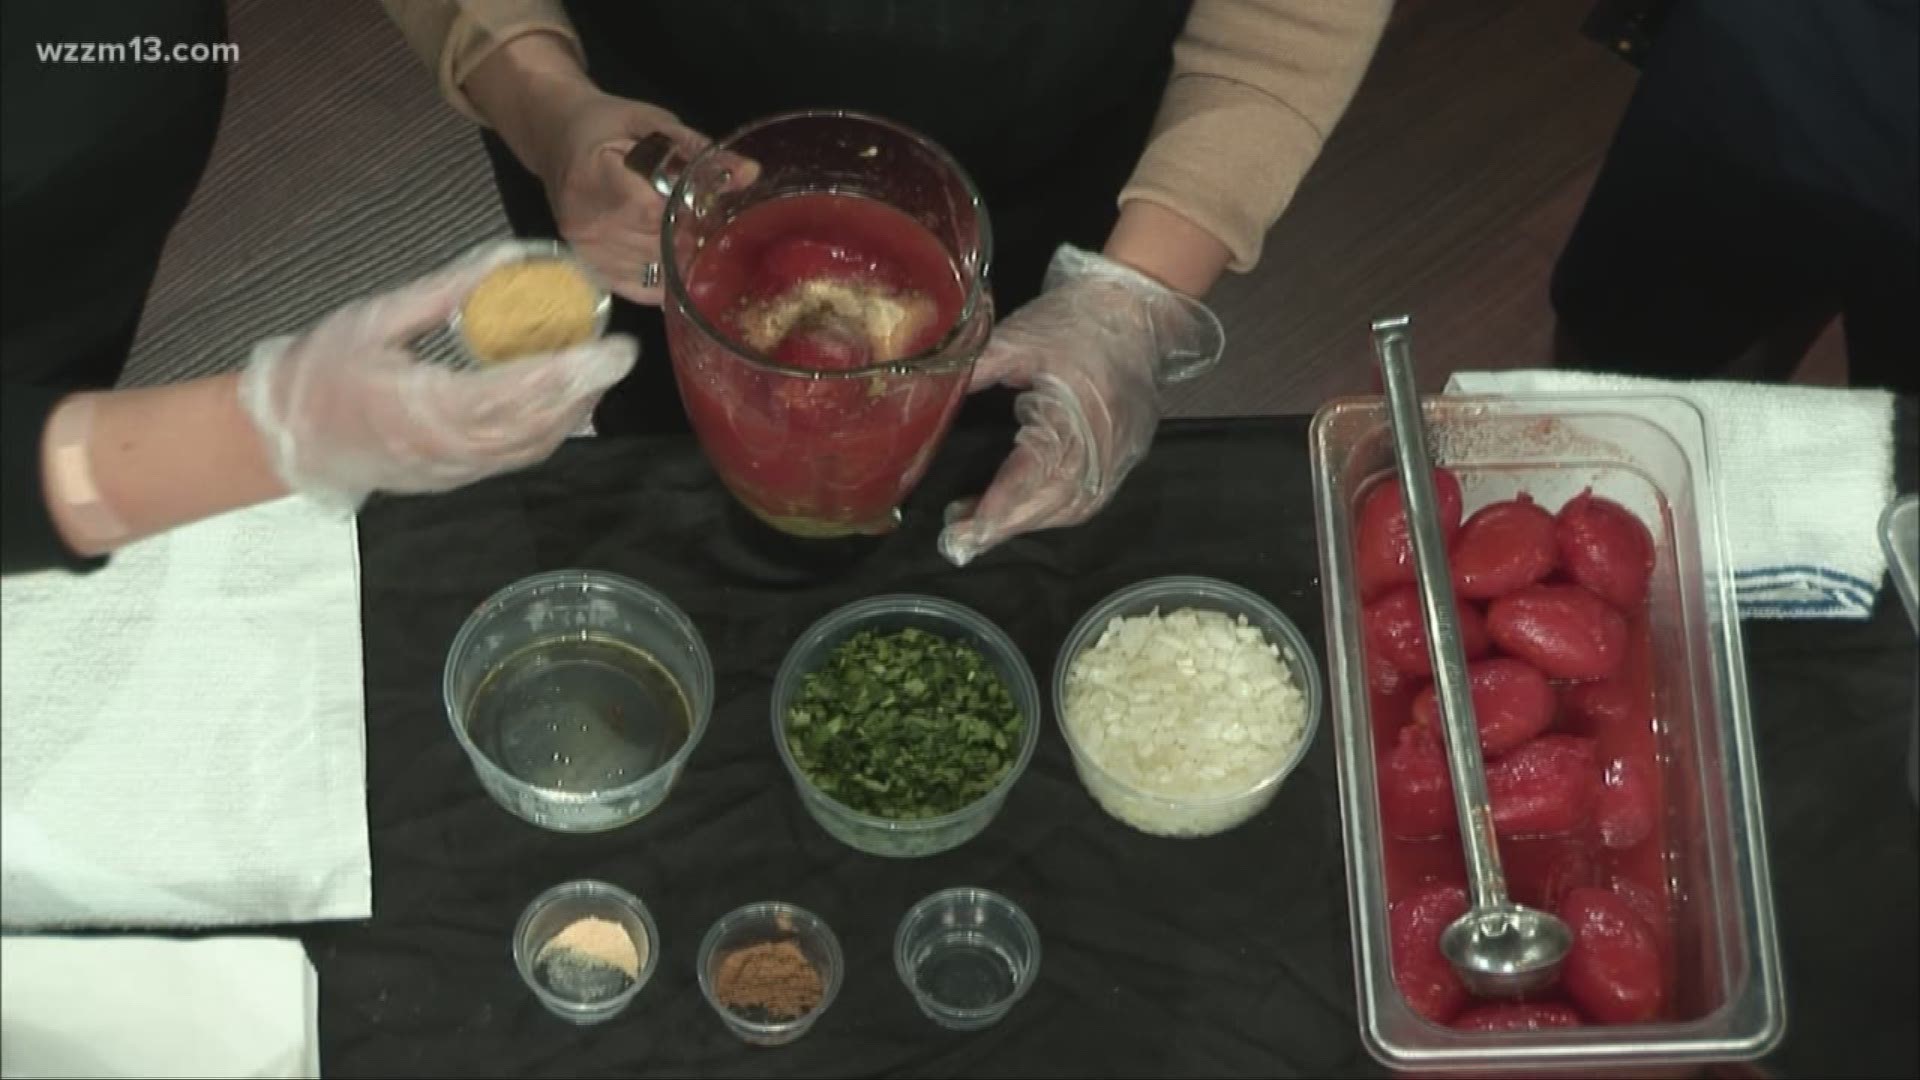 Tamales Mary joins us to share a delicious salsa recipe to eat with your tortilla chips Sunday!